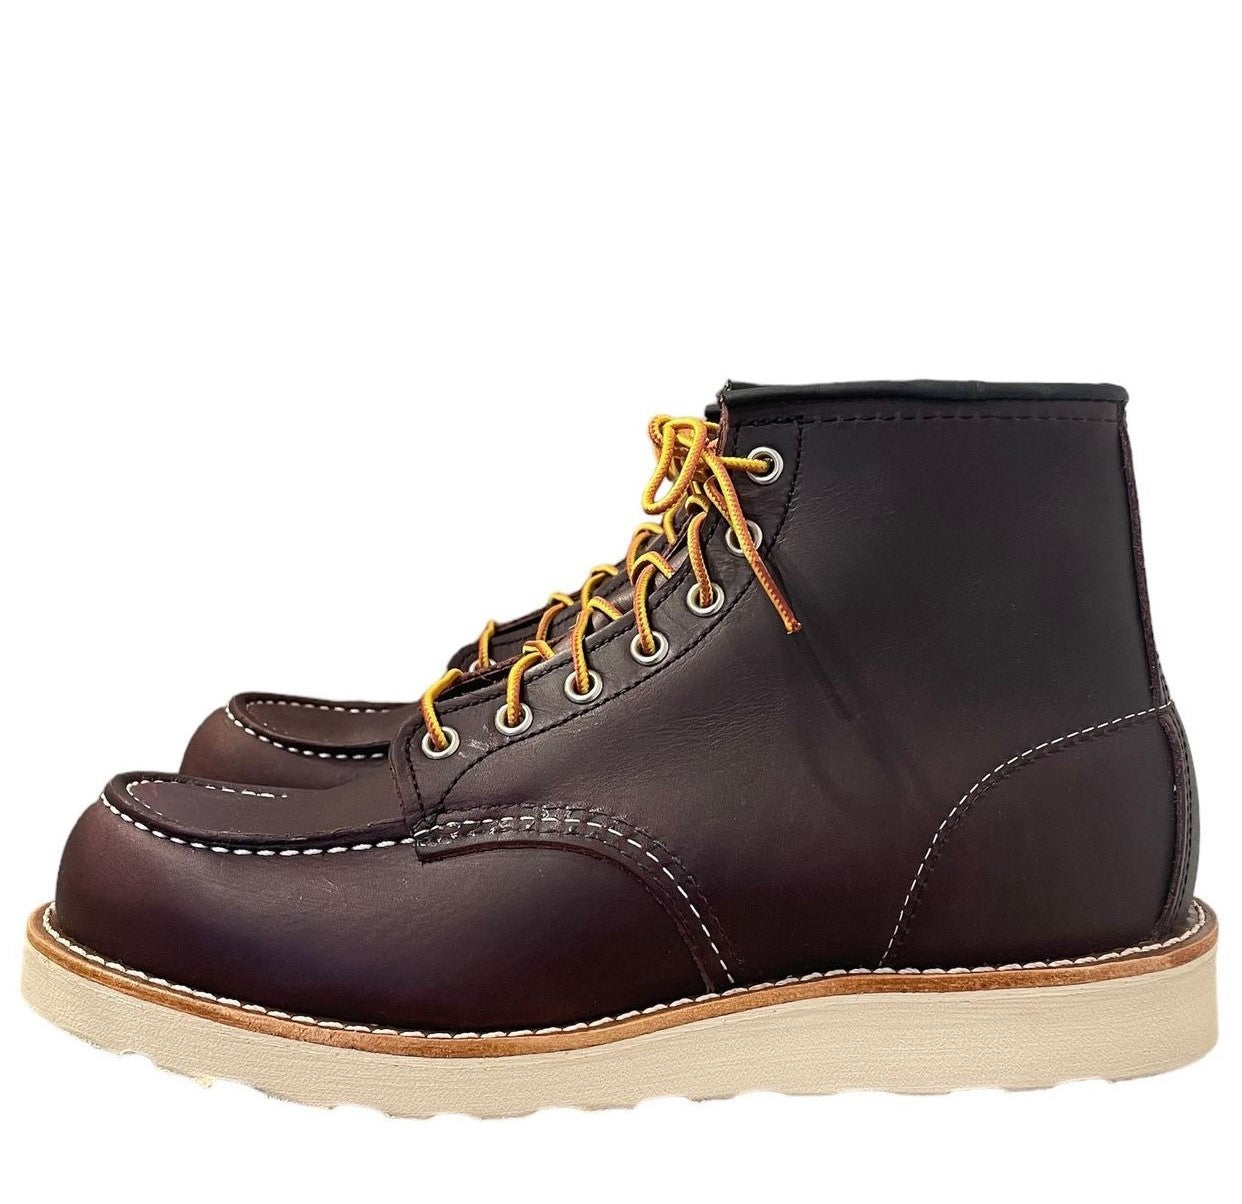 RED WING SHOES 6" CLASSIC MOC TOE 8847 - BLACK CHERRY EXCALIBUR